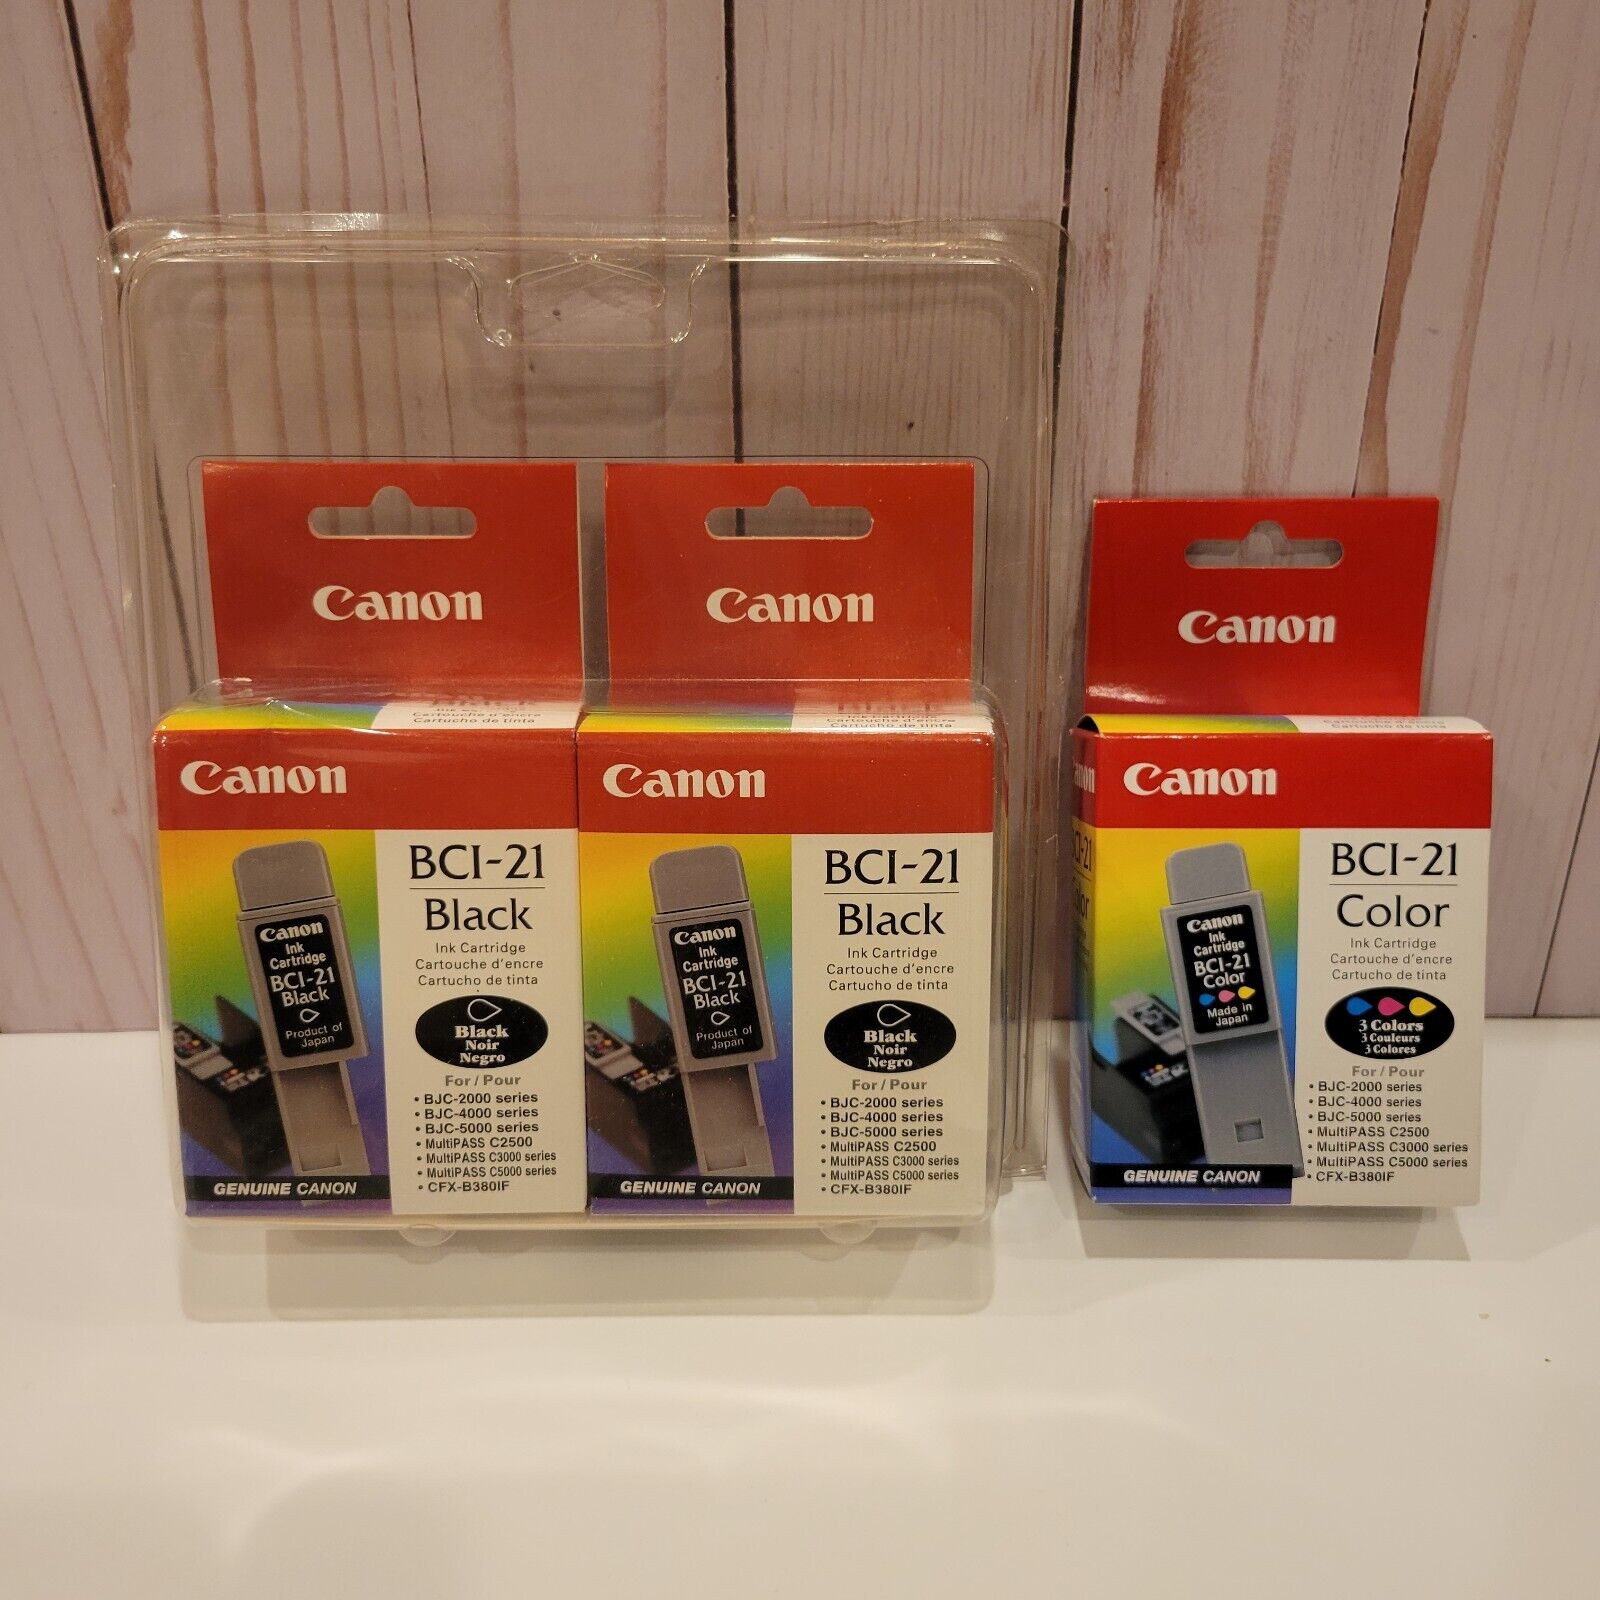 Canon Ink Cartridge BCI-21 Lot of 3 Boxes Genuine Canon Product New Unopened 